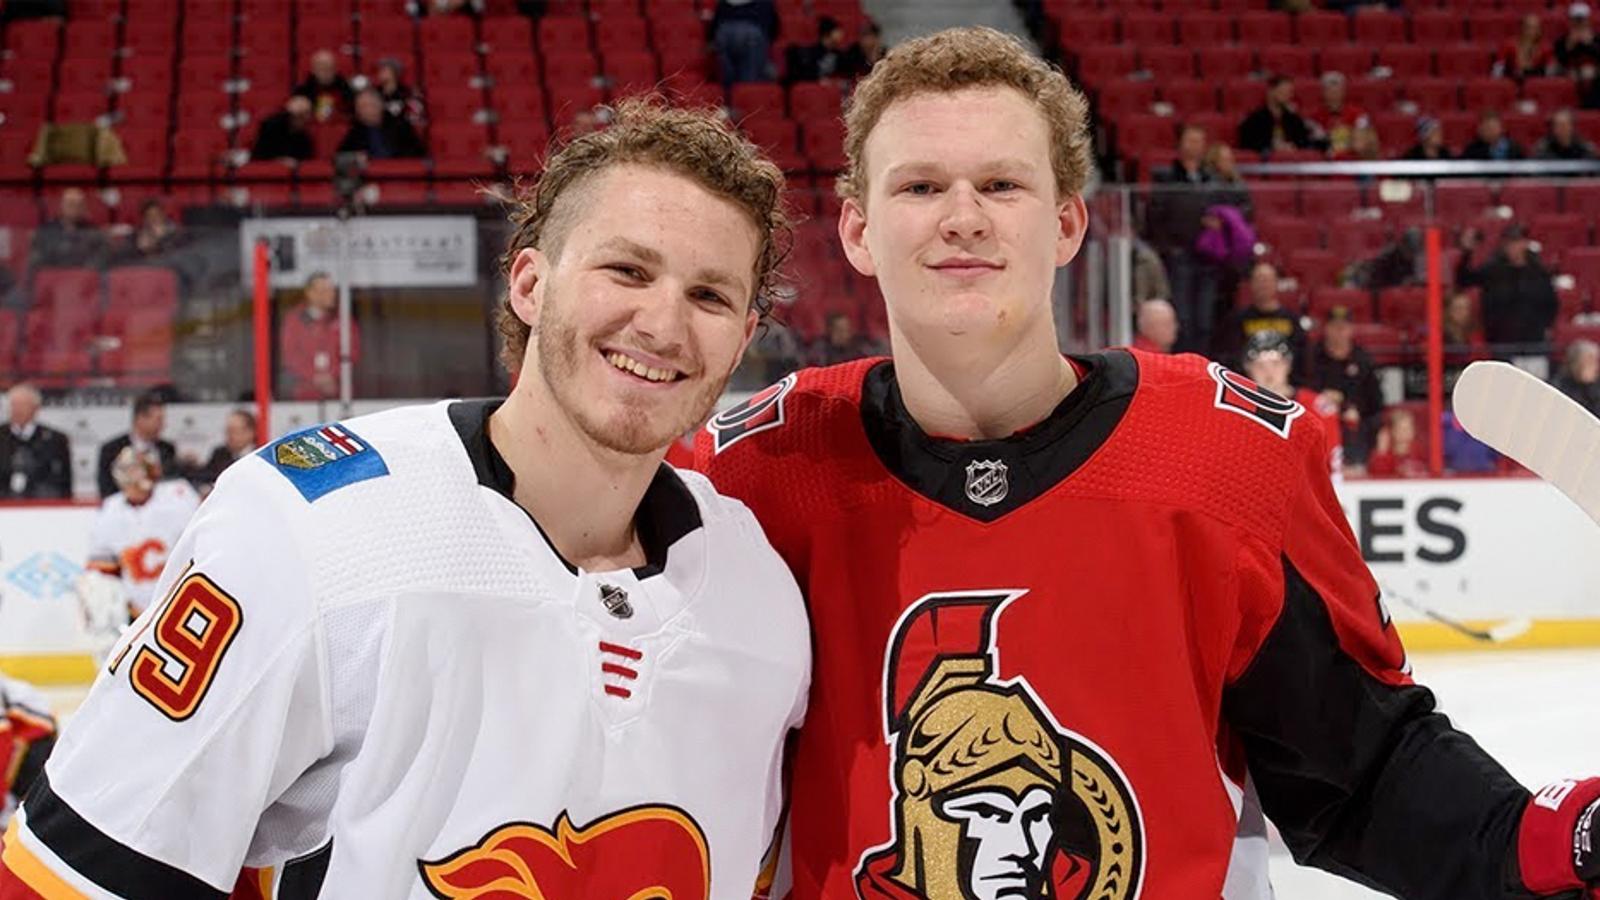 Matthew Tkachuk talks about fighting his brother Brady in upcoming four game series